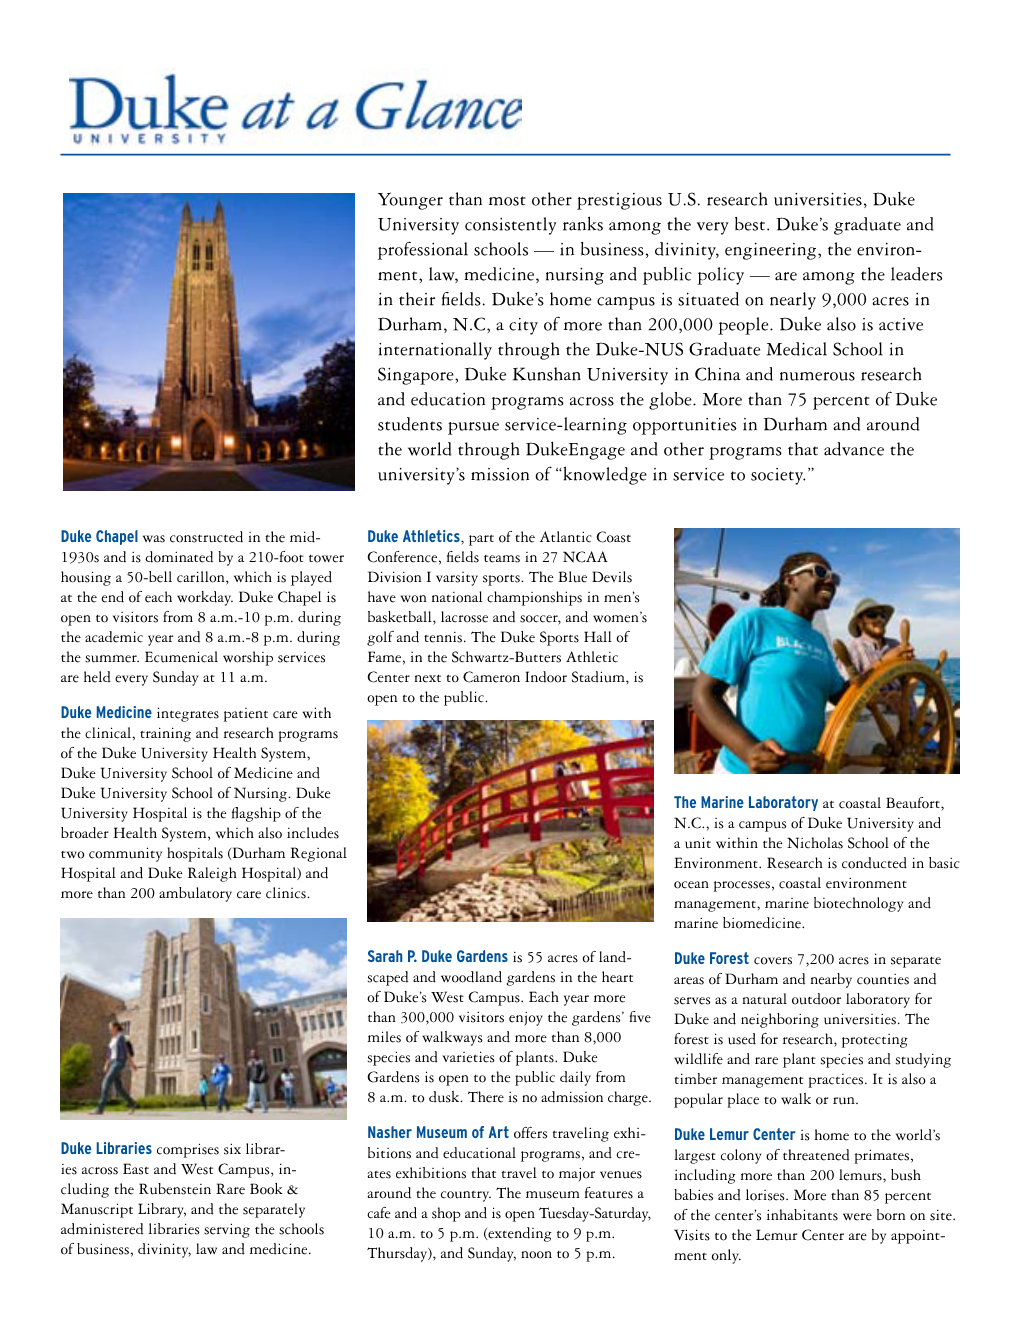 Younger Than Most Other Prestigious U.S. Research Universities, Duke University Consistently Ranks Among the Very Best